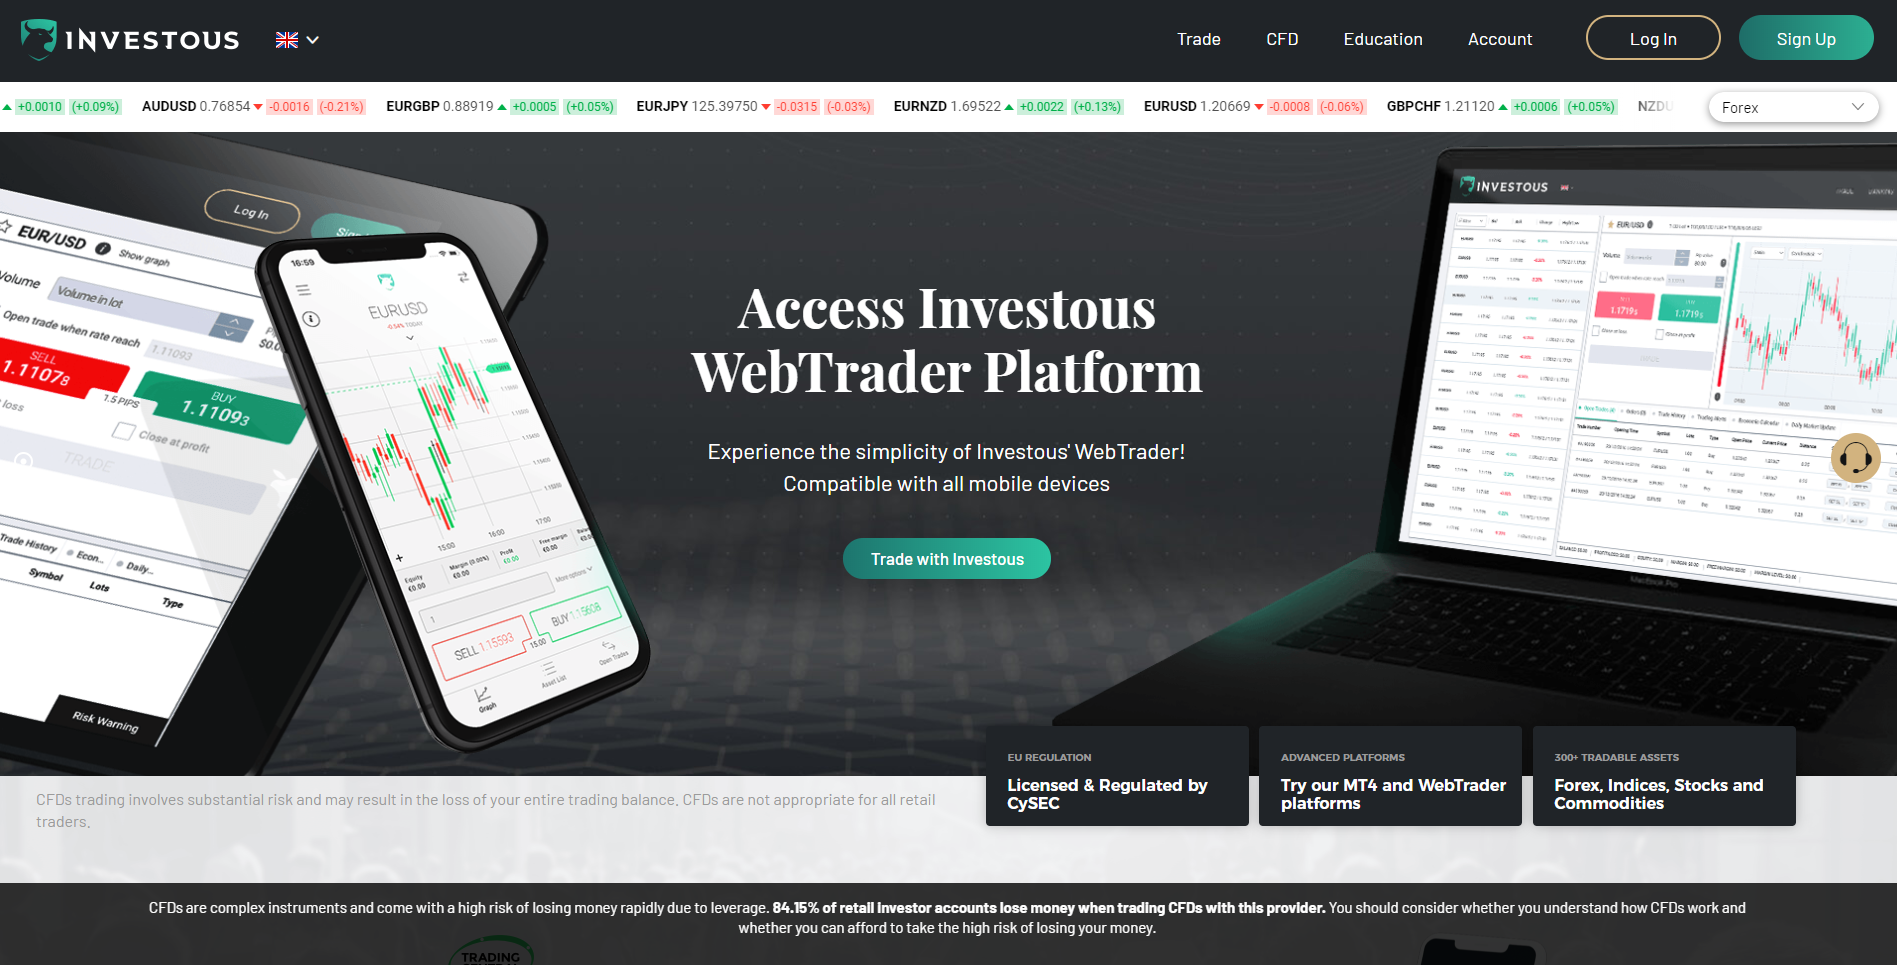 Official Investous website